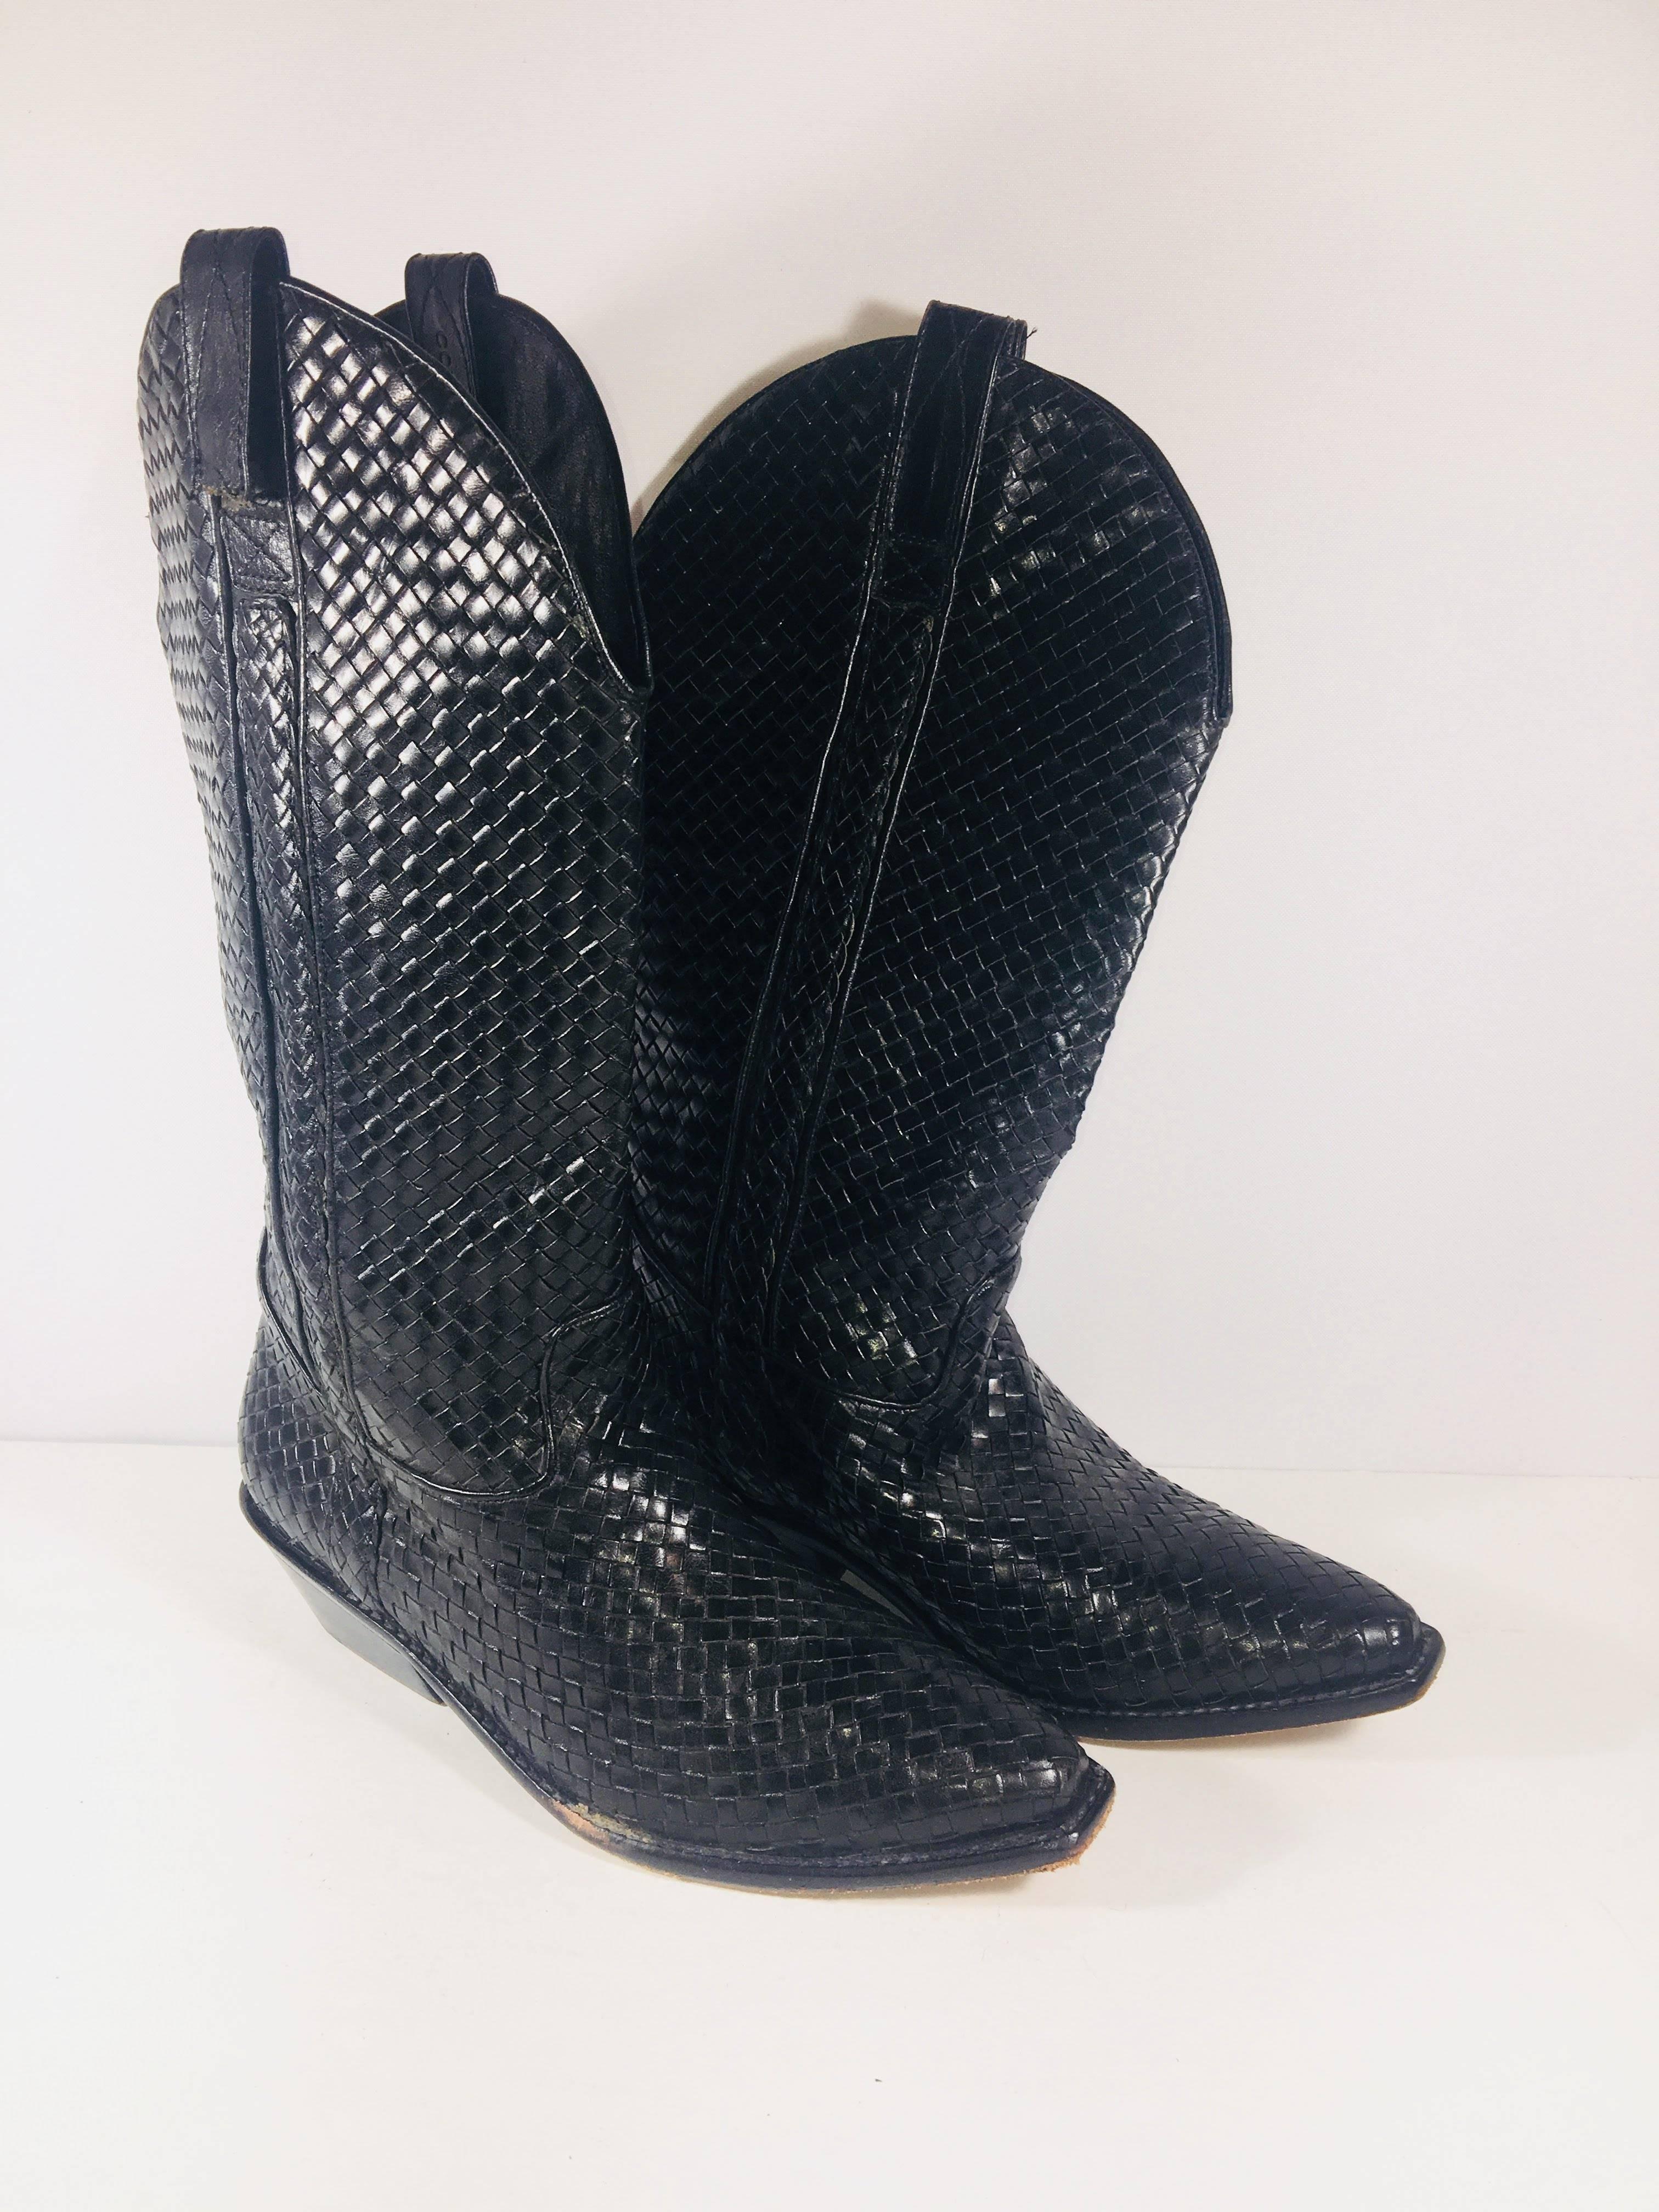 Cole Haan Black Leather Woven Cowboy Boots, Mid-Calf Height in size 8.5